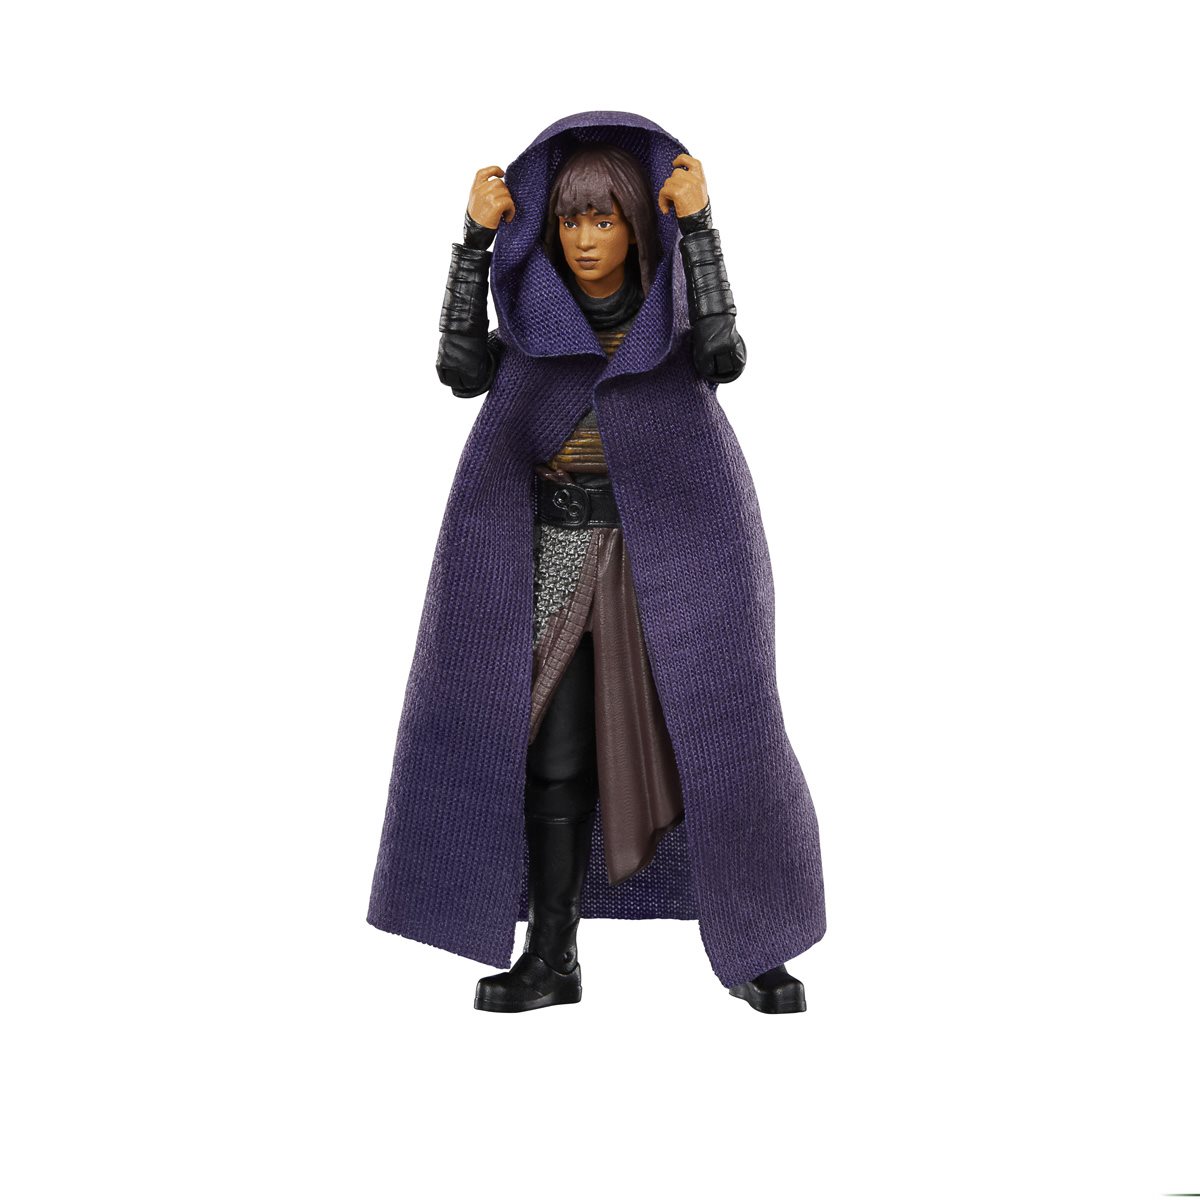  Star Wars The Vintage Collection 3 3/4-Inch Mae (Assassin) Action Figure  HSF9790 5010996226952